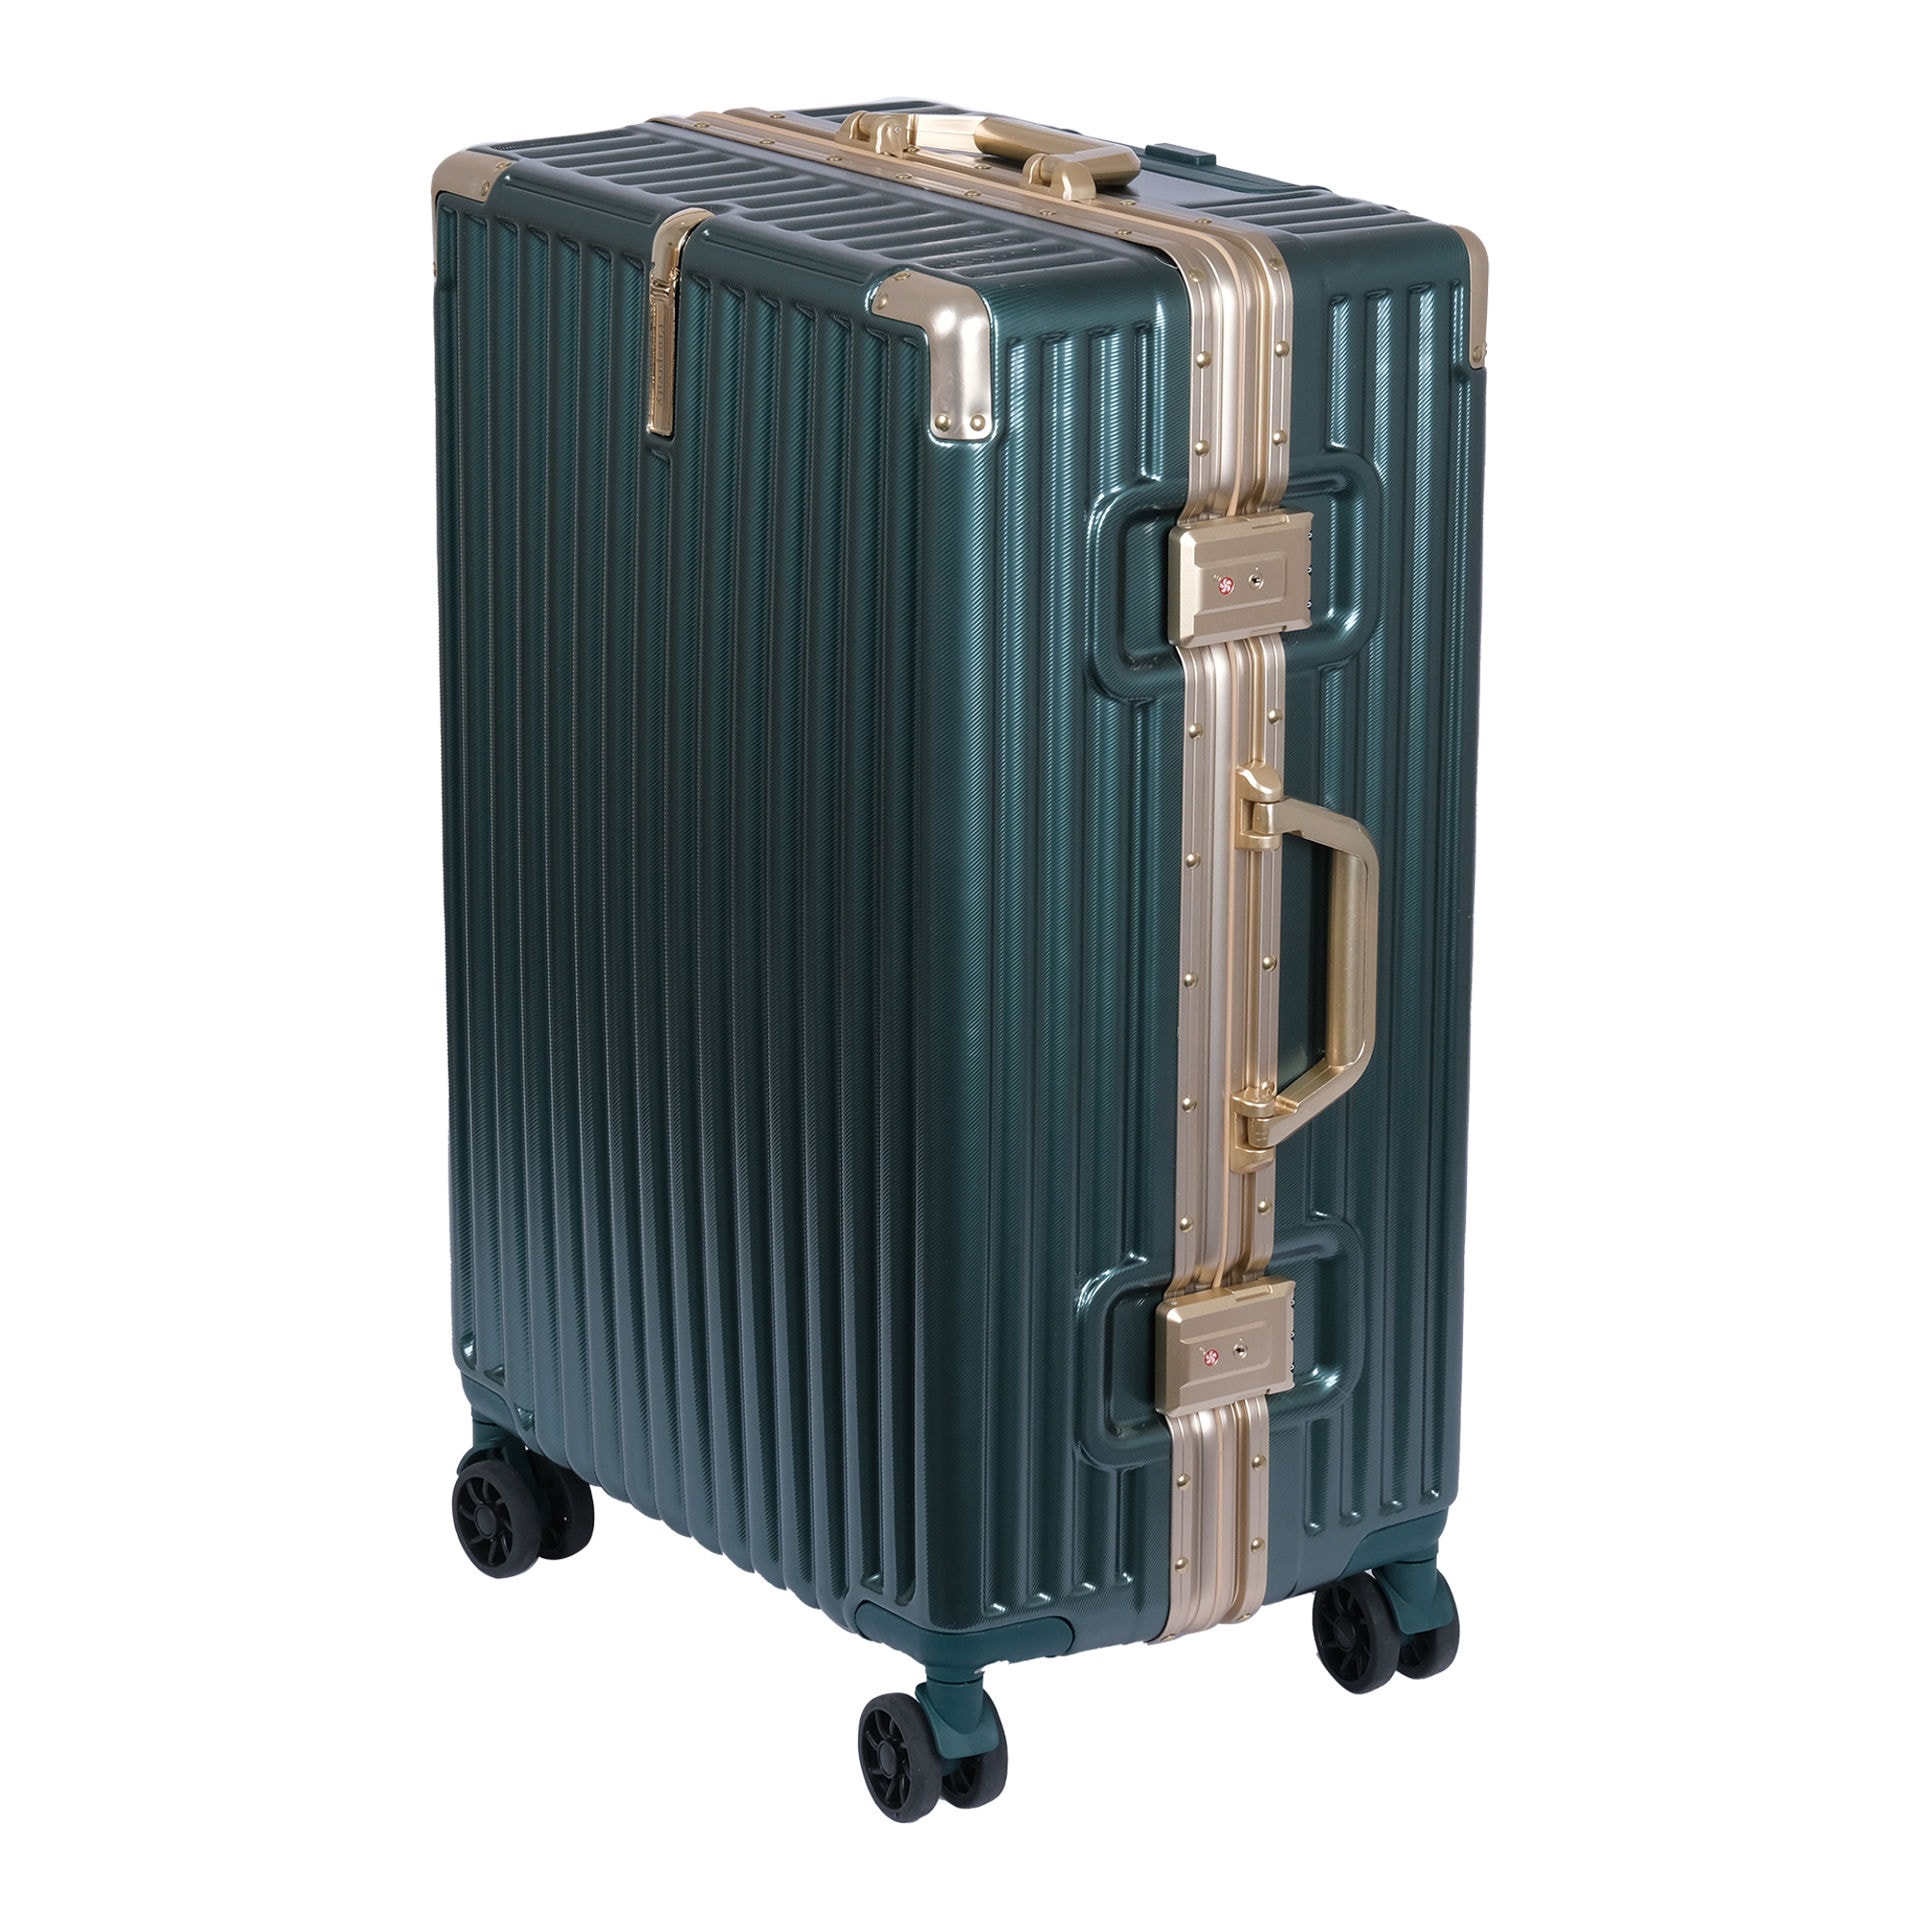 Buy American Tourister Holiday Trolley Bag, Teal, 55cm, Luggage With  Spinner Wheels Online - Shop Fashion, Accessories & Luggage on Carrefour  Saudi Arabia